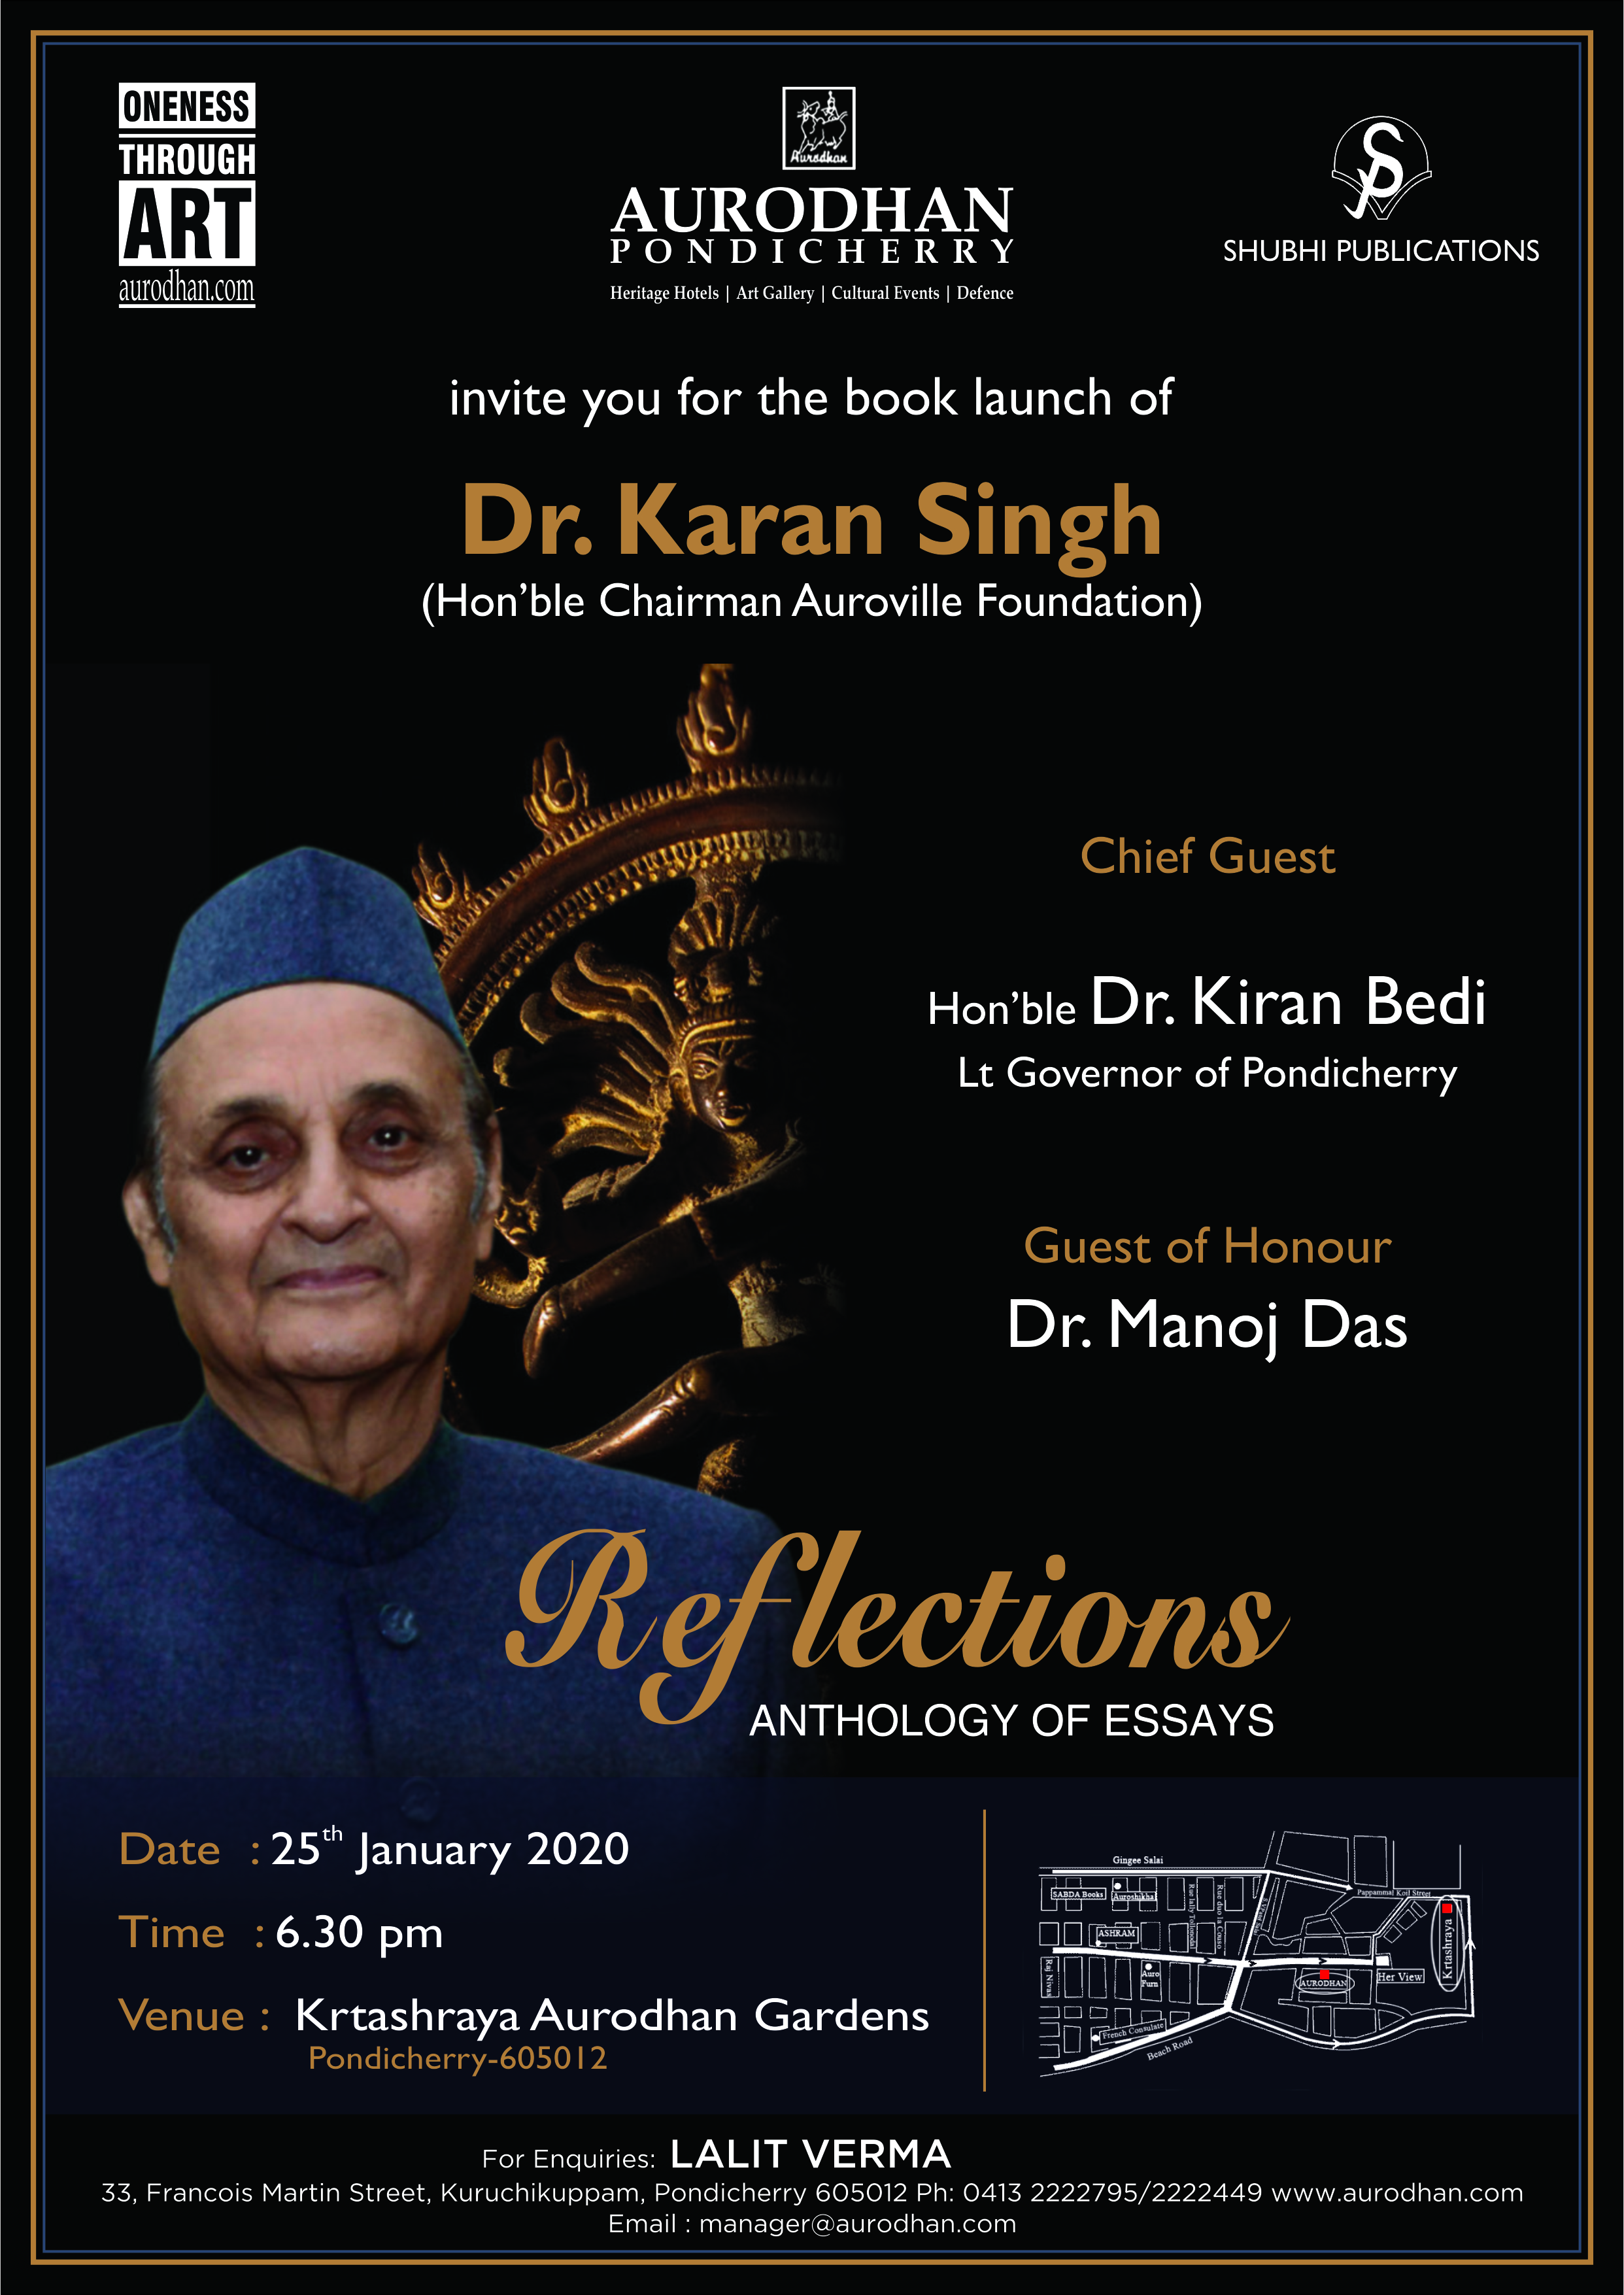 INVITE YOU FOR BOOK LUNCH OF DR. KARAN SINGH